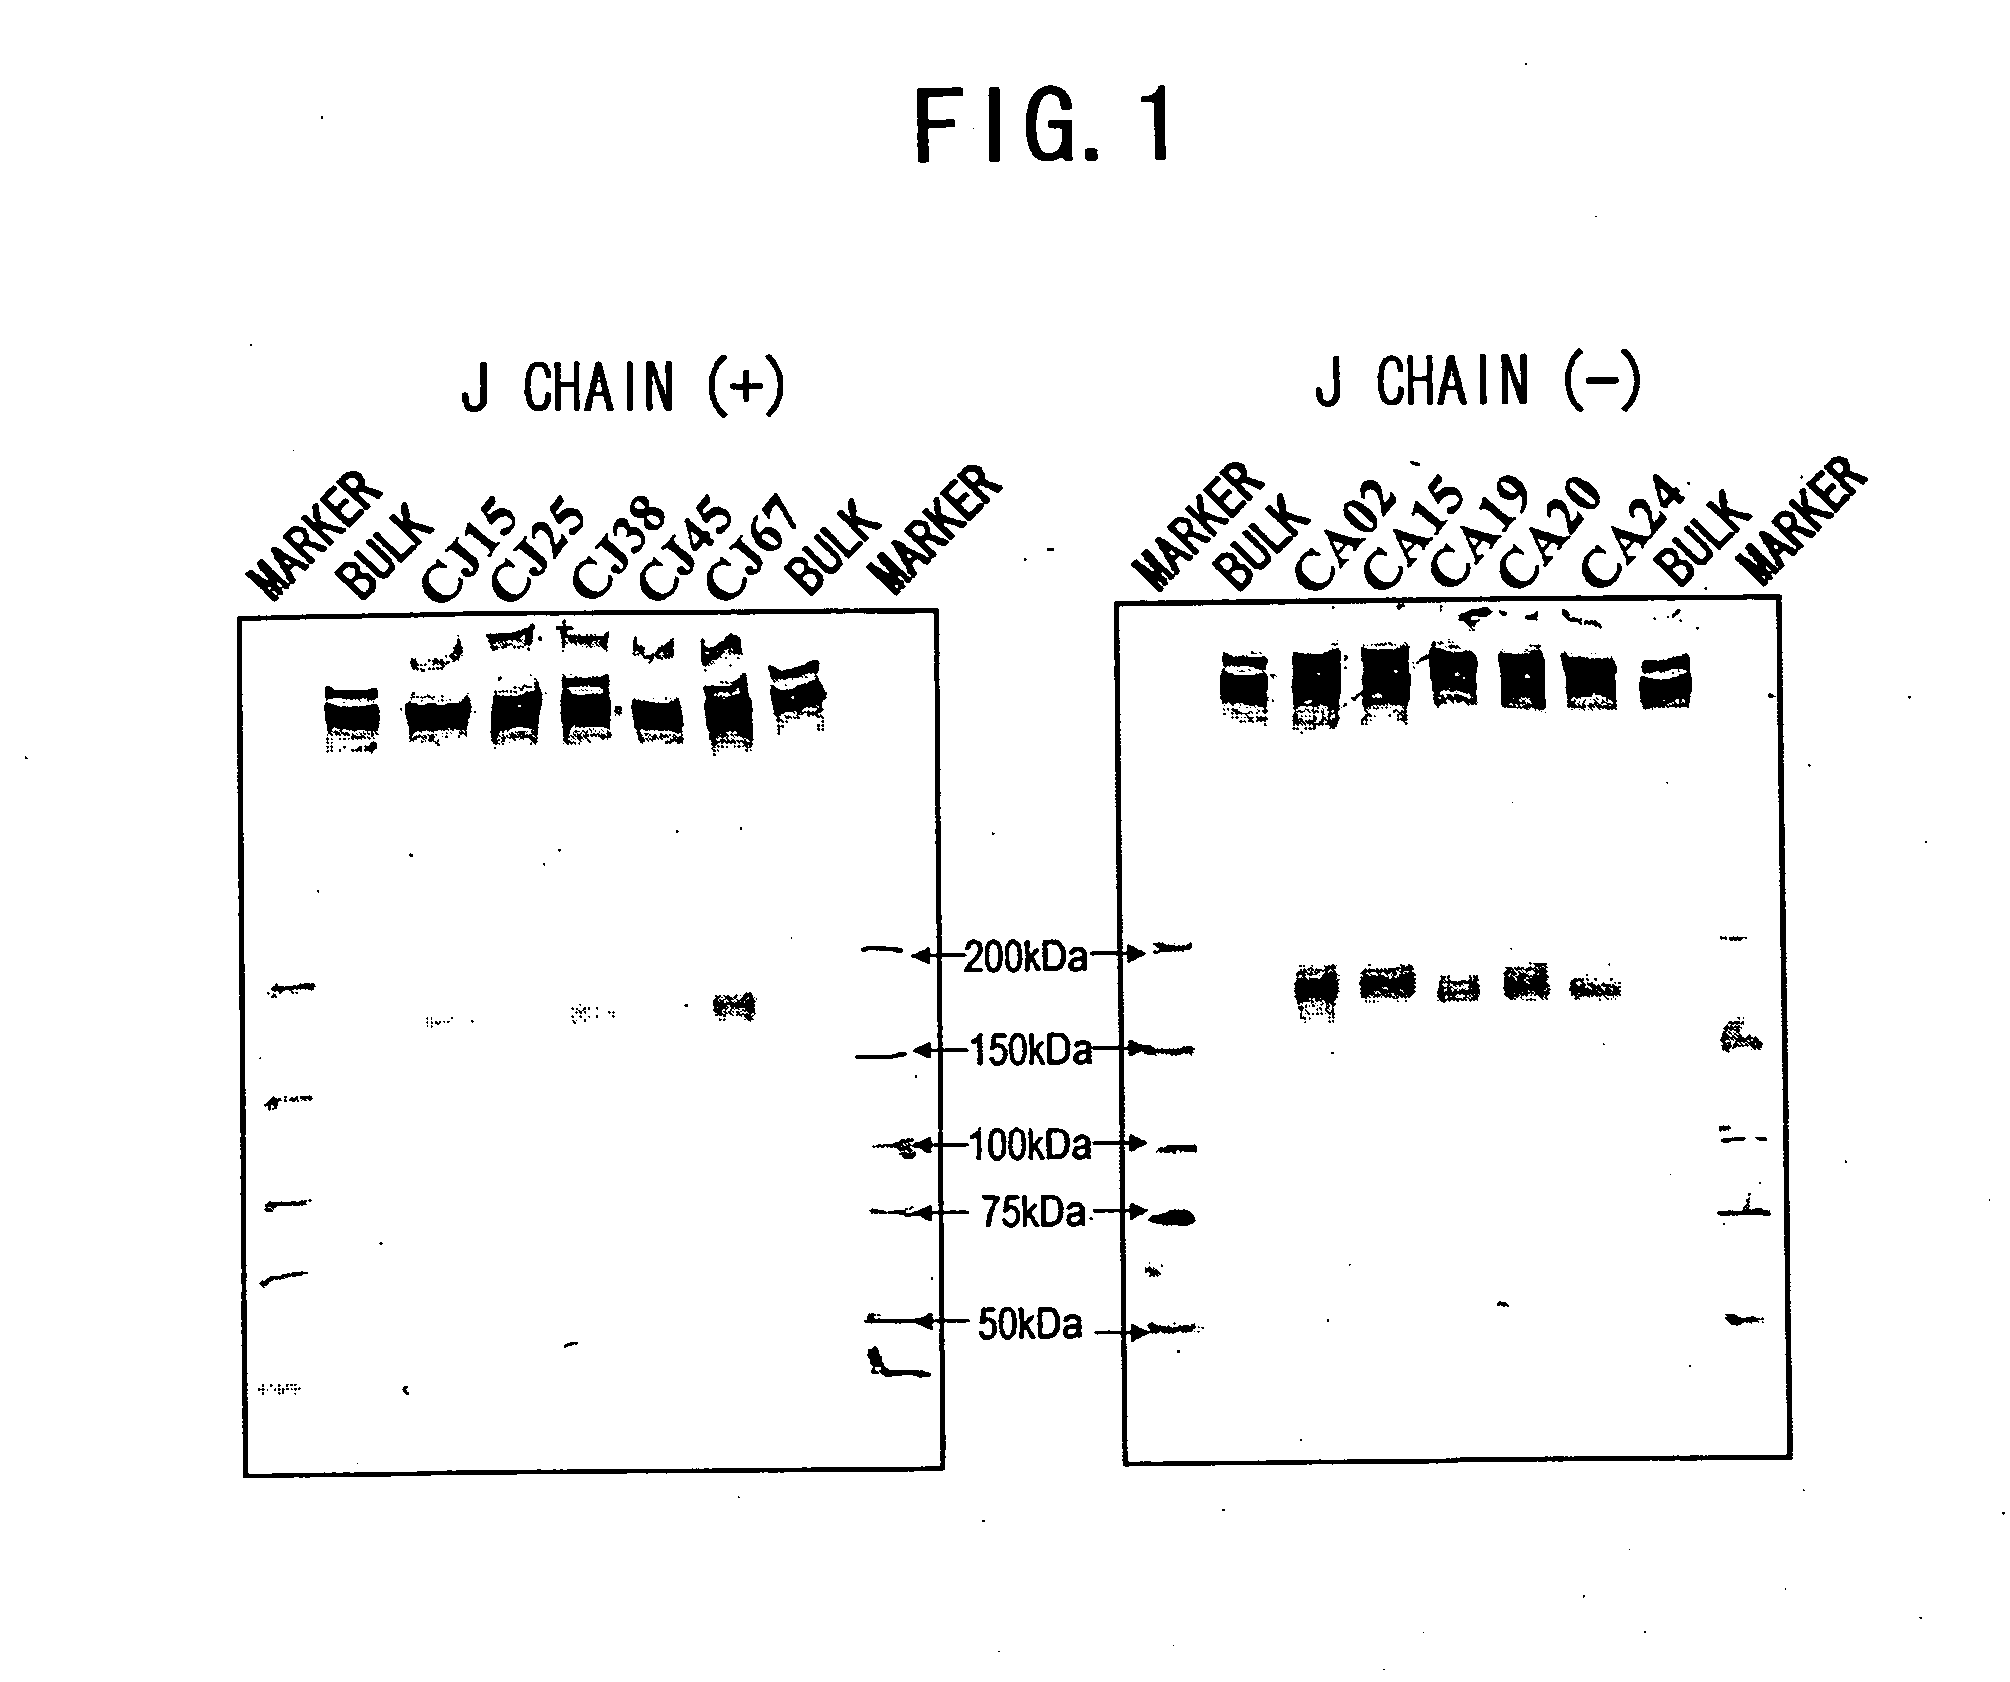 IGM production by transformed cells and methods of quantifying said IgM production